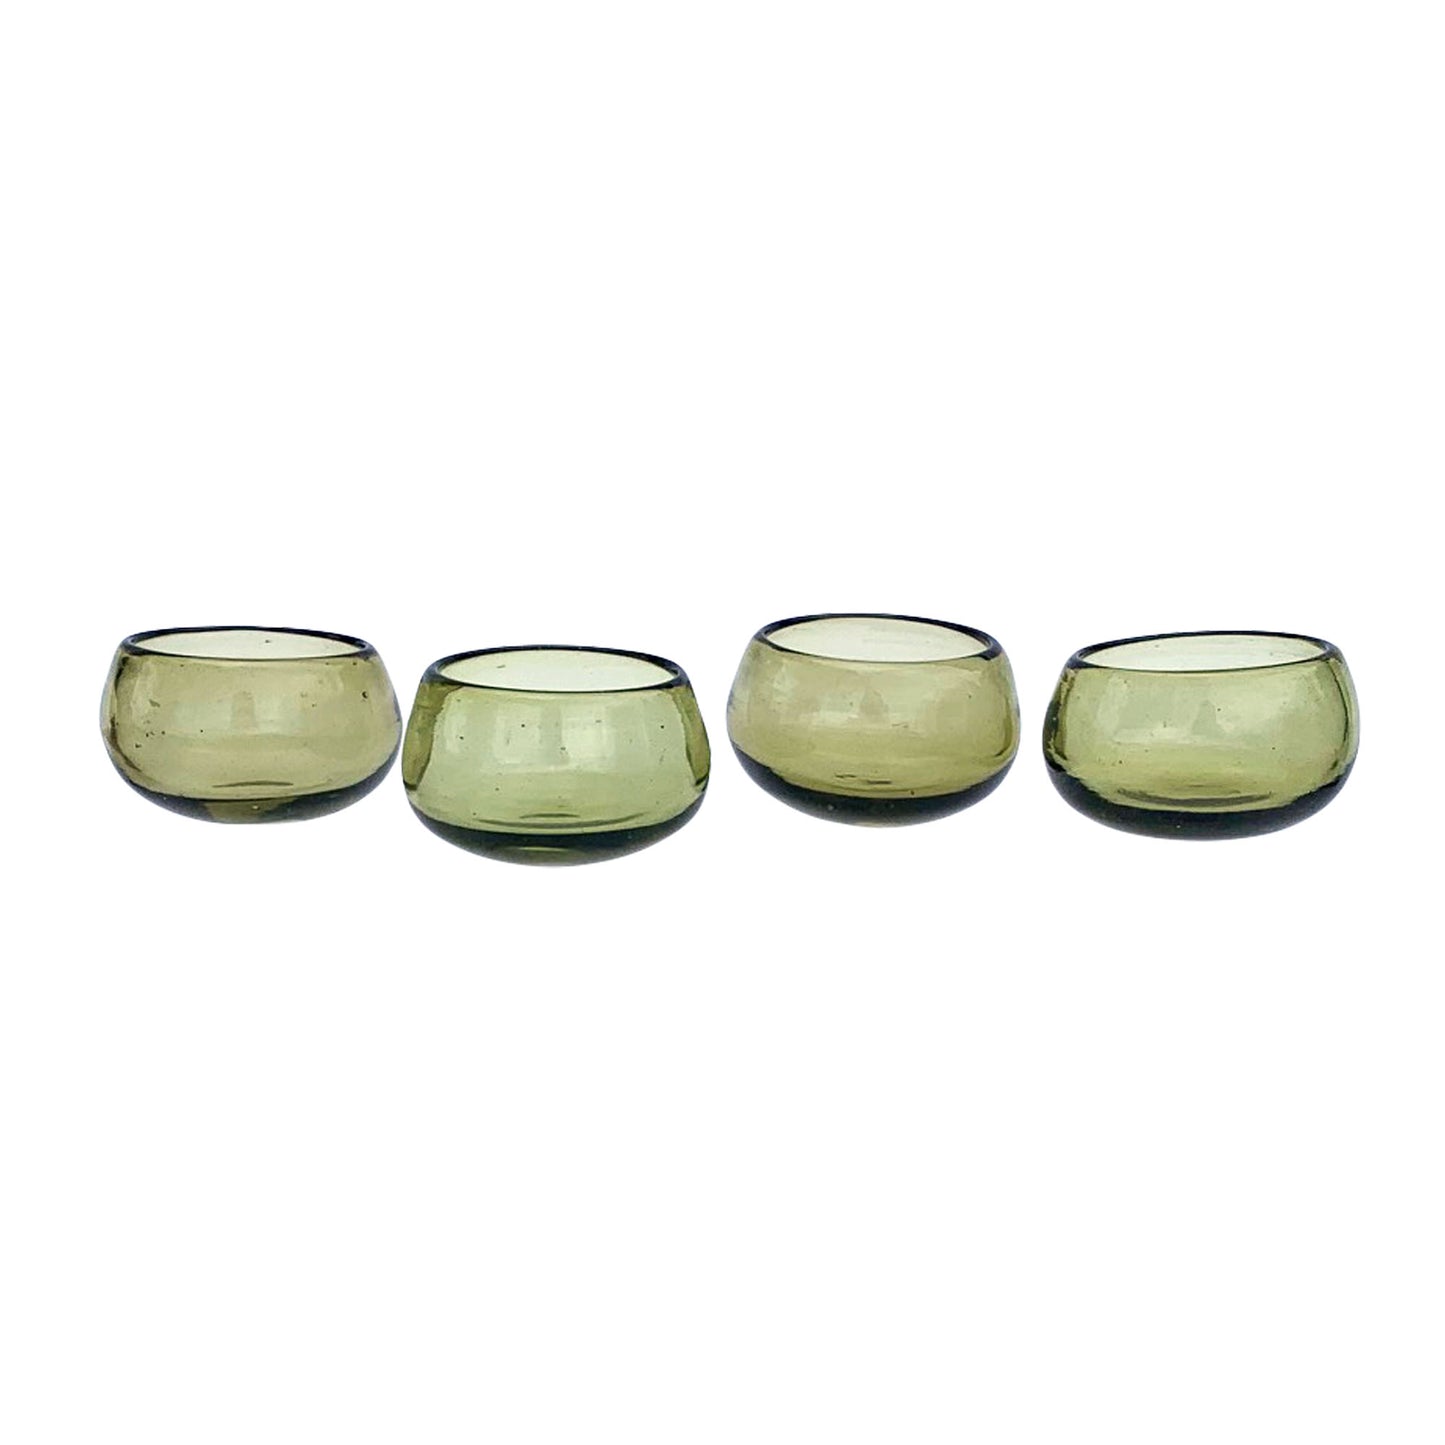 Mexican Hand Blown Recycled Glass Copitas for Mezcal or Tequila | Handmade Wide Mouth Shot Glasses in Olive Green